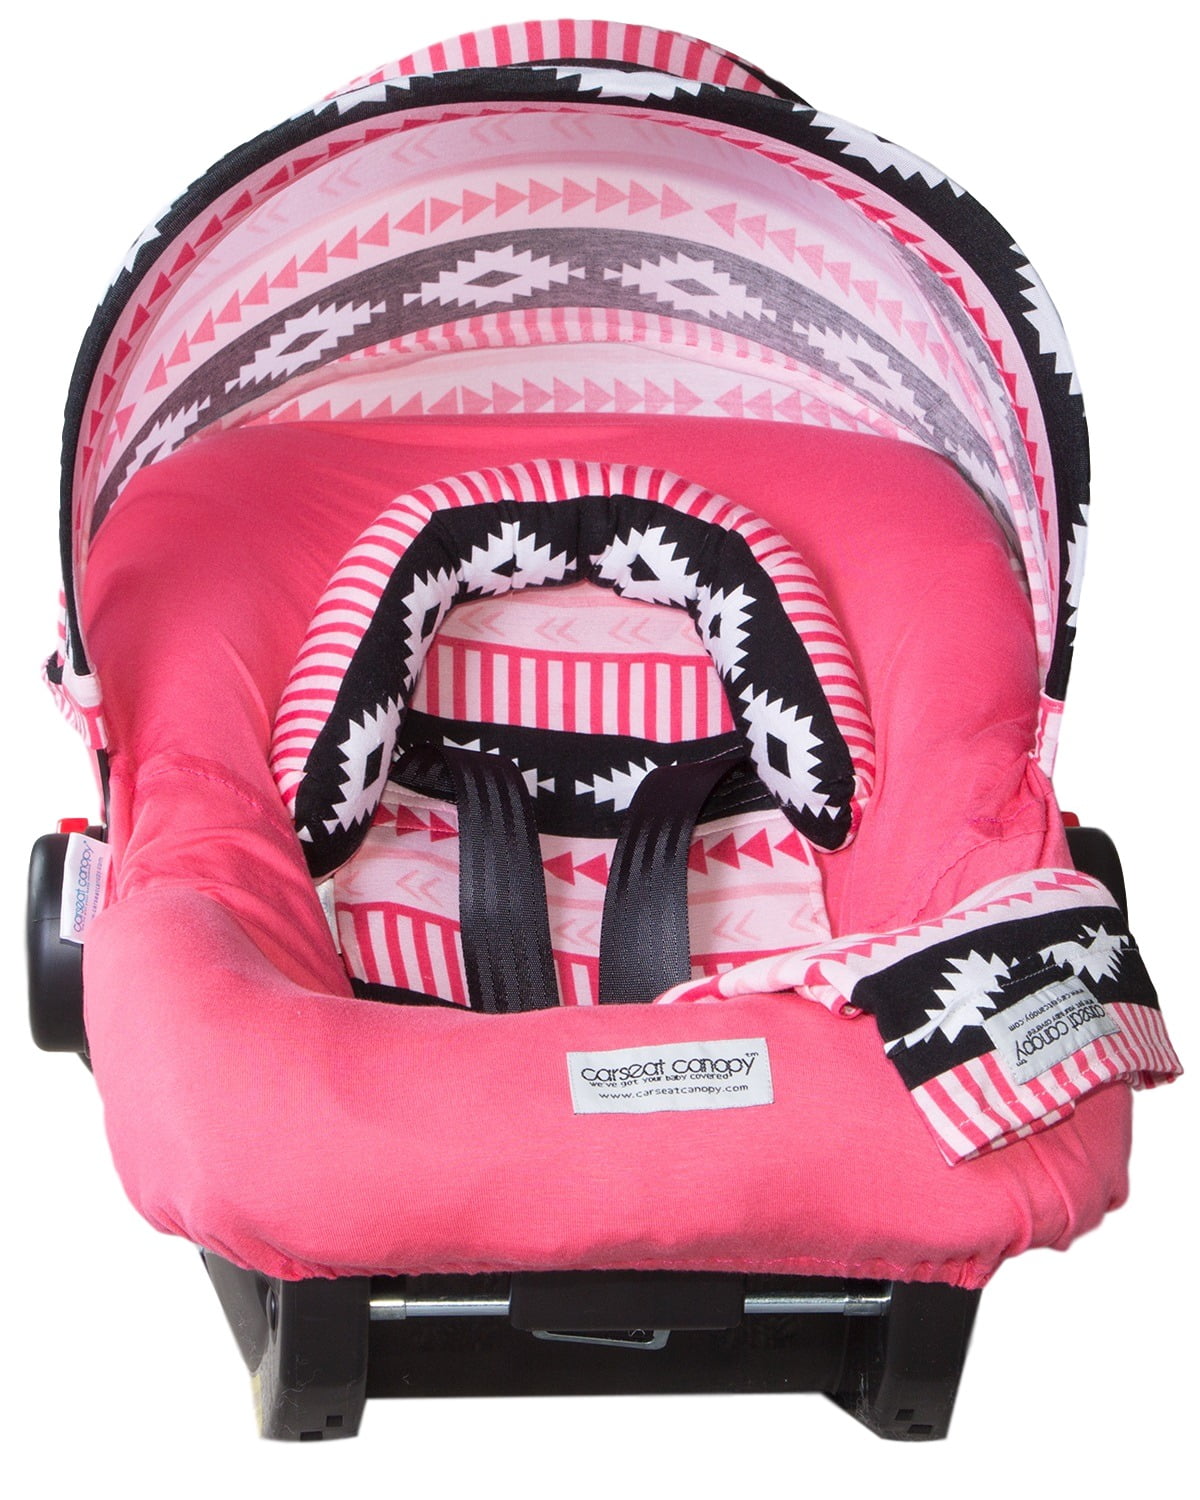 baby infant car seat cover and hood cover baby pink chevron w/ gray polka dots 